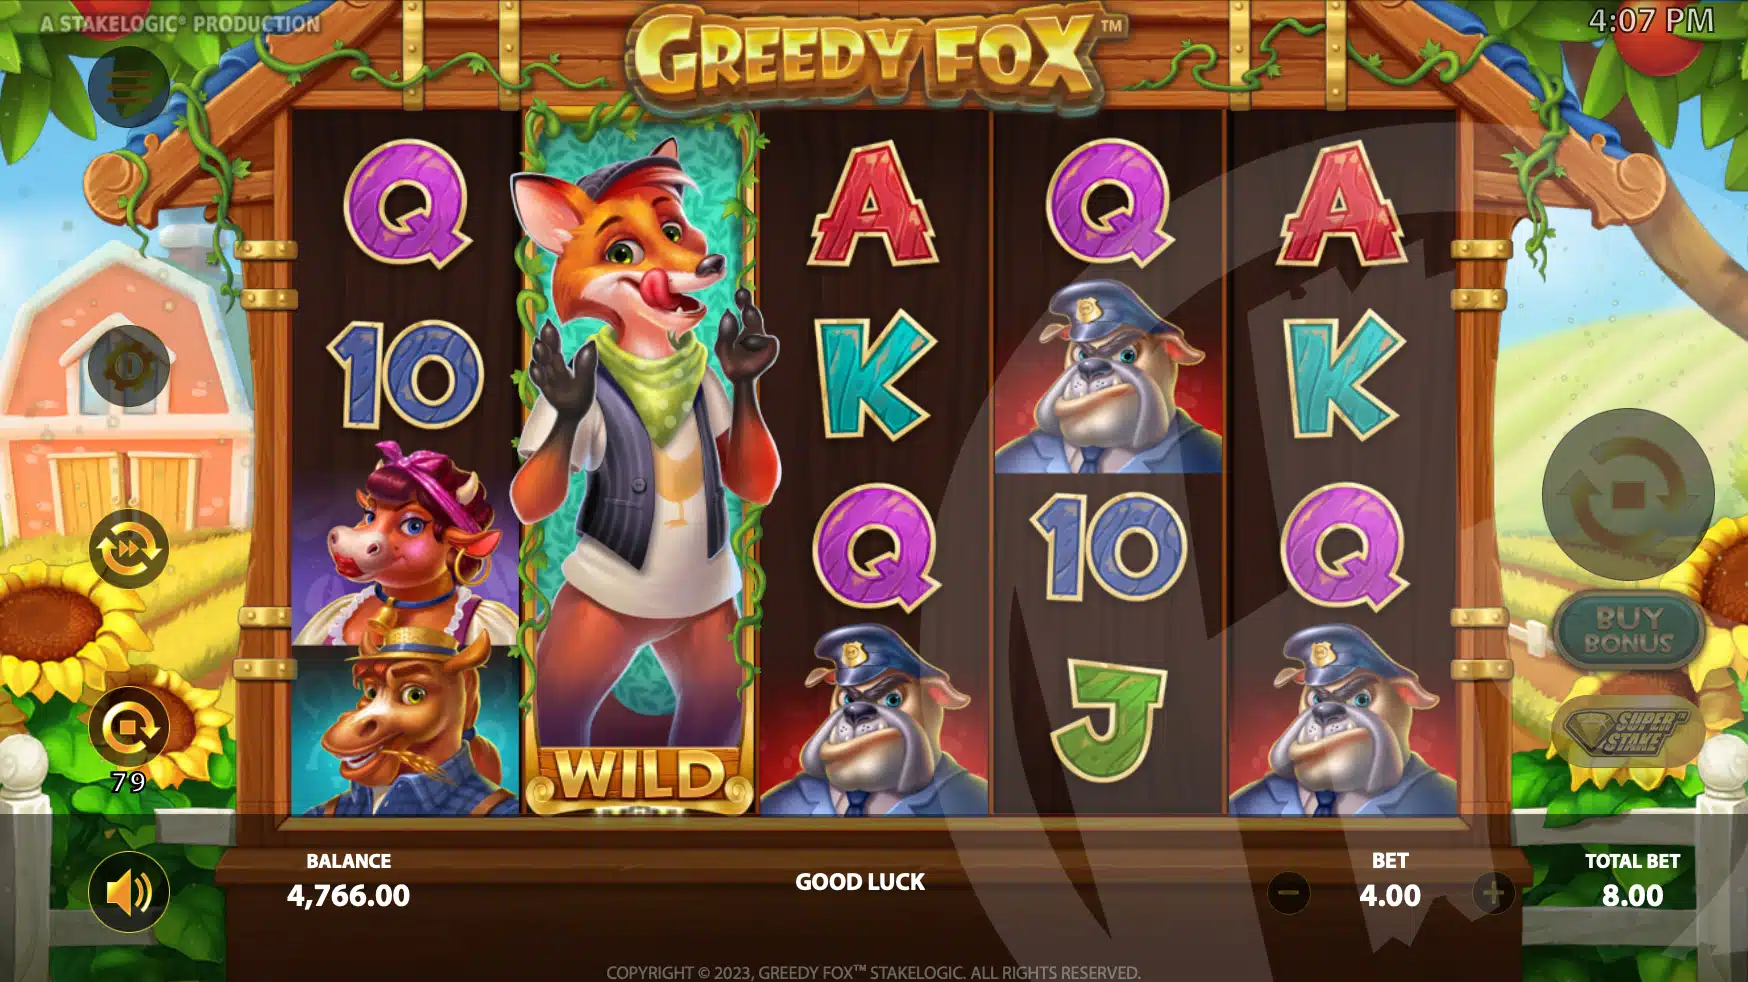 Wild Greedy Fox Symbols Expand to Cover the Entire Reel